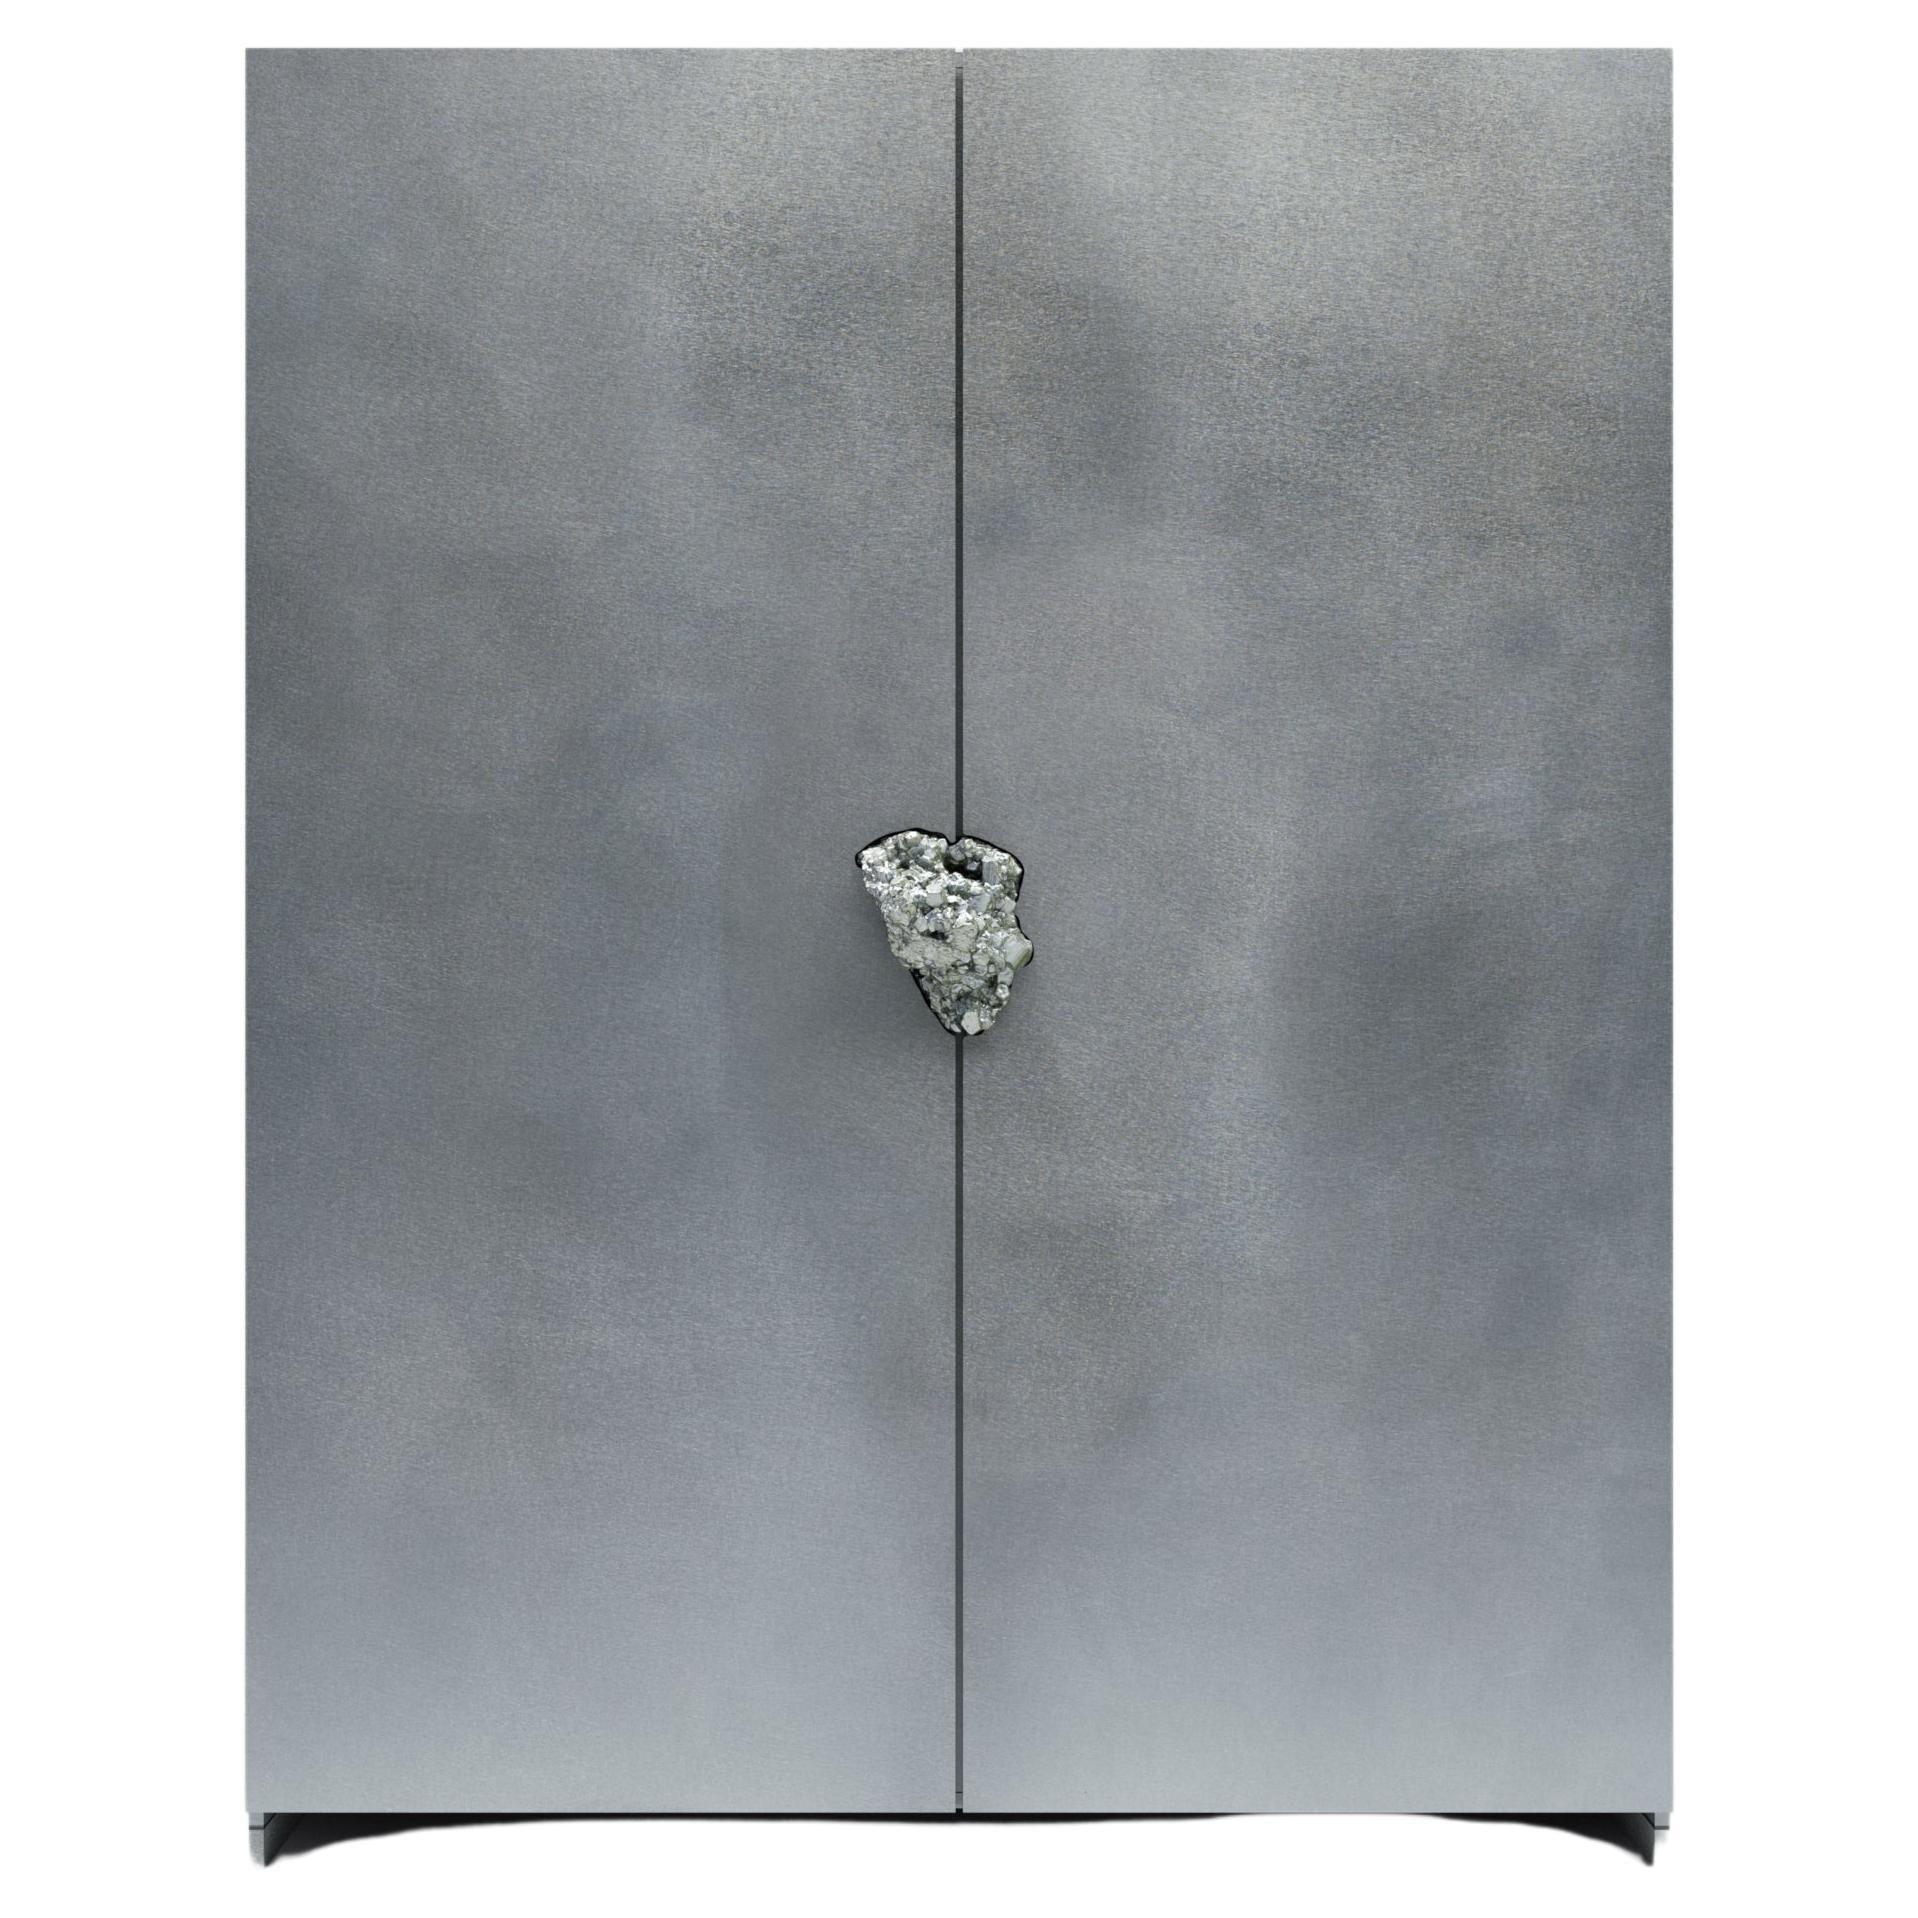 Oxidized and Waxed Aluminium Cabinet with Pyrite by Pierre De Valck For Sale